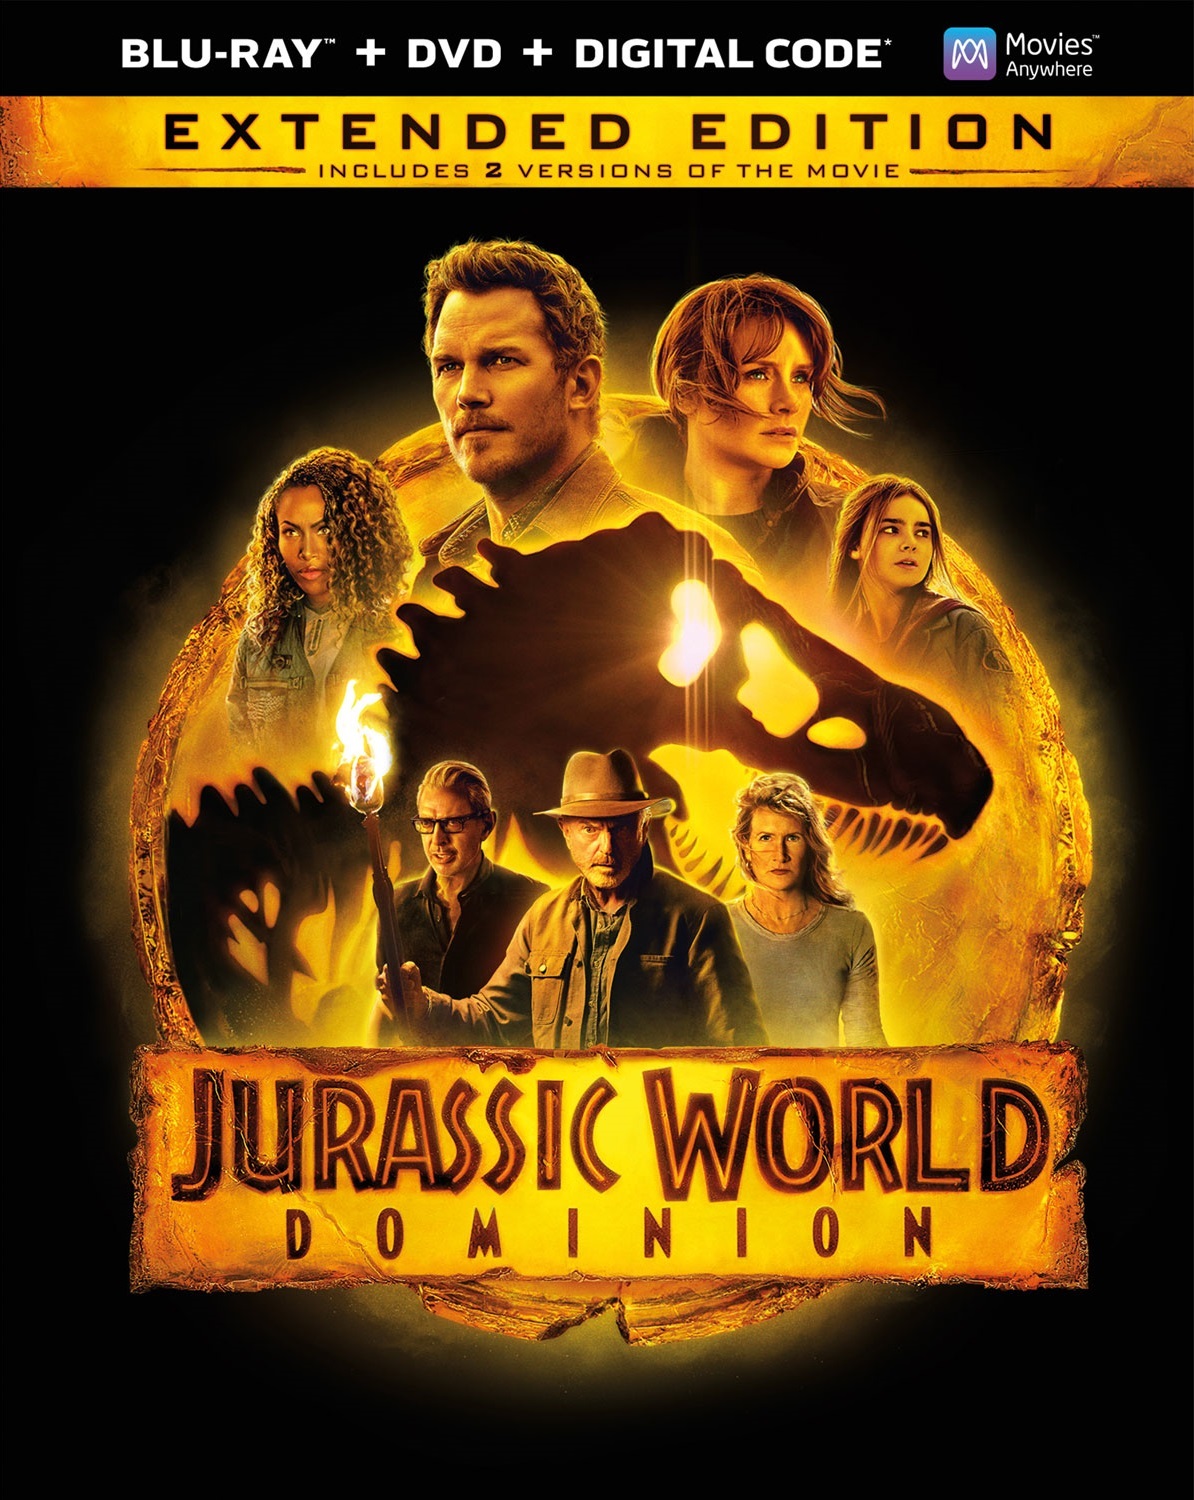 world - Jurassic World Dominion (2022) [Theatrical and Extended Edition] Jurassic World: Dominio (2022) [Versión de Teatro y Extendida] [DTS-HD HRA 7.1 + SUP] [Blu Ray] 310940_front